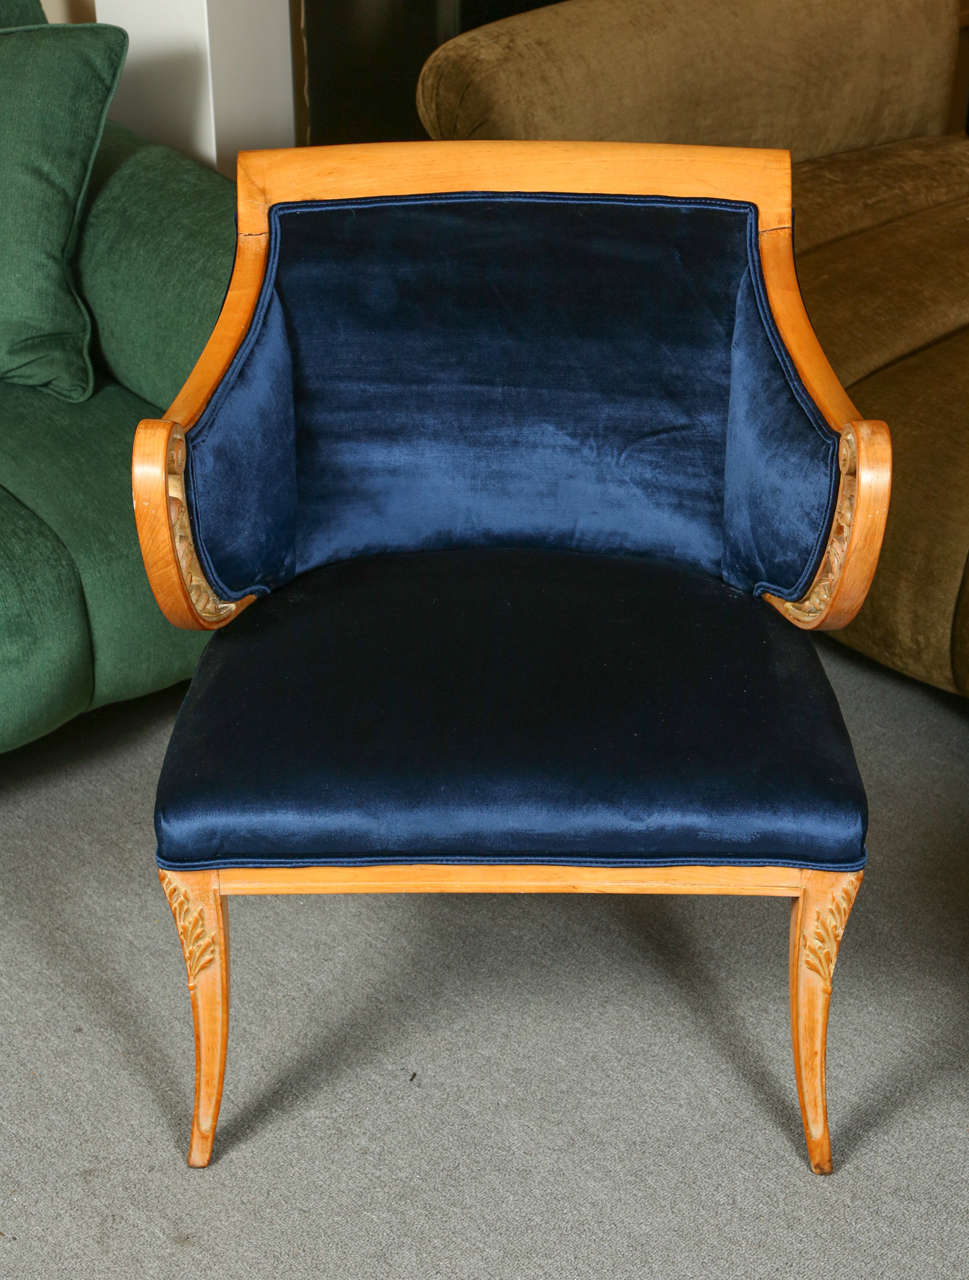 Glamorous side chair in the Hollywood regency style.  This graceful chair has a natural-finished wood frame with scrolled arms.  The arms and front legs are accented with carved leaves. It is newly reupholstered in a lovely midnight blue silk velvet.